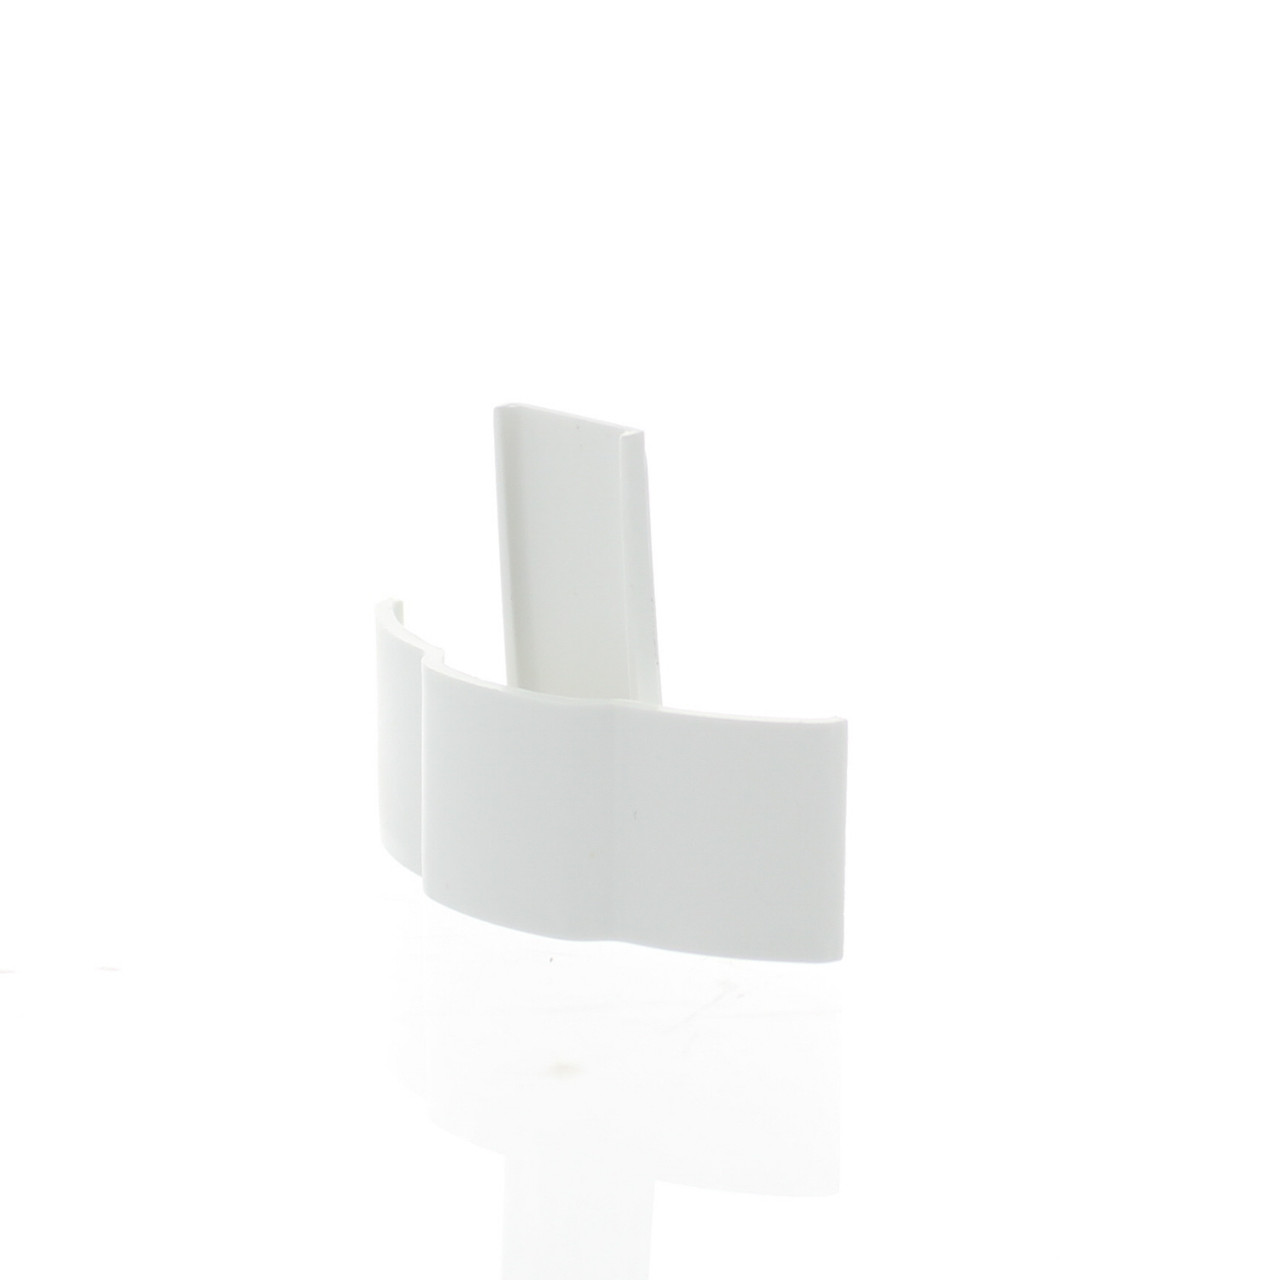 Jr Products New RV Camper Polar White Full Extrusion End Cap, 49635, 00180915